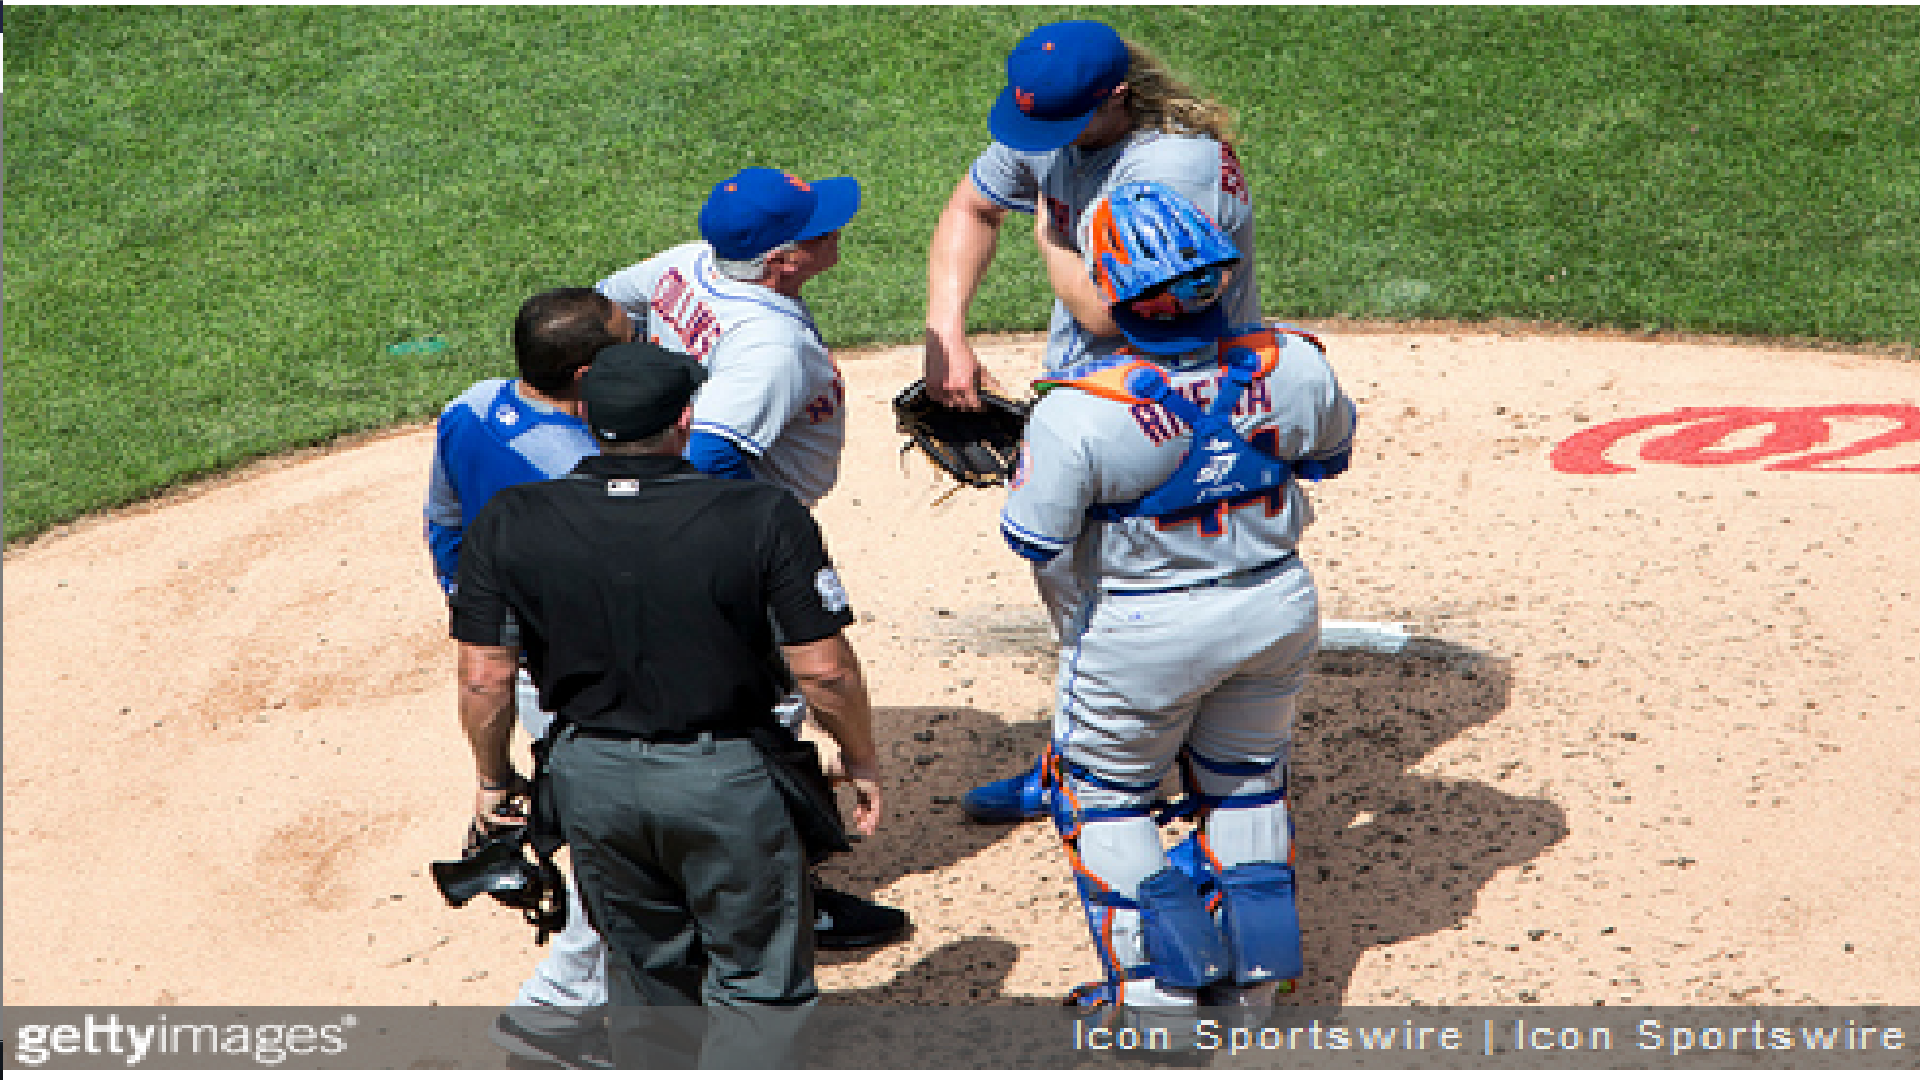 MLB Rule Changes Are Coming, Should We Be Scared?